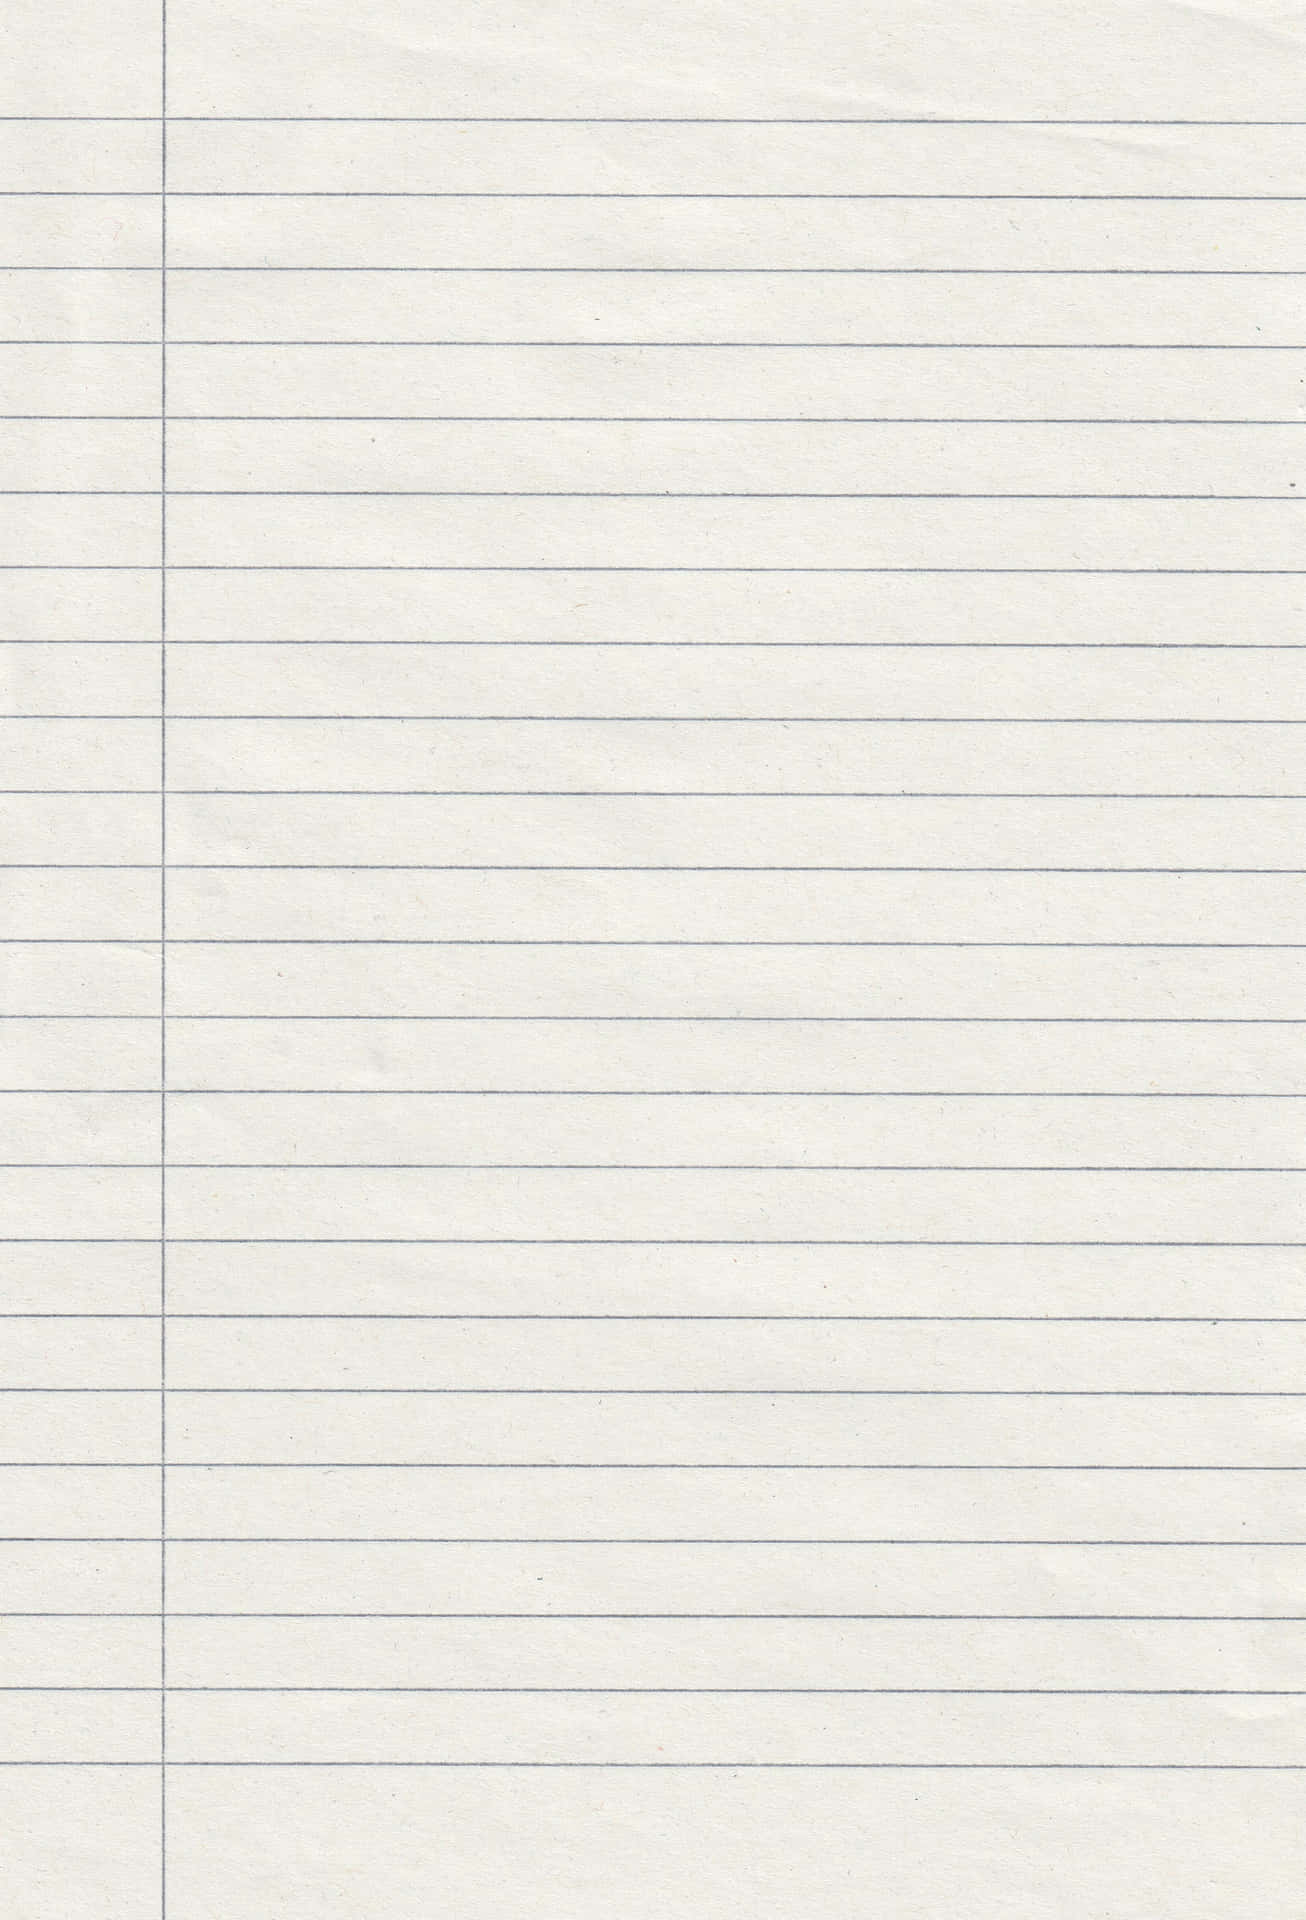 Classic Lined Paper Background